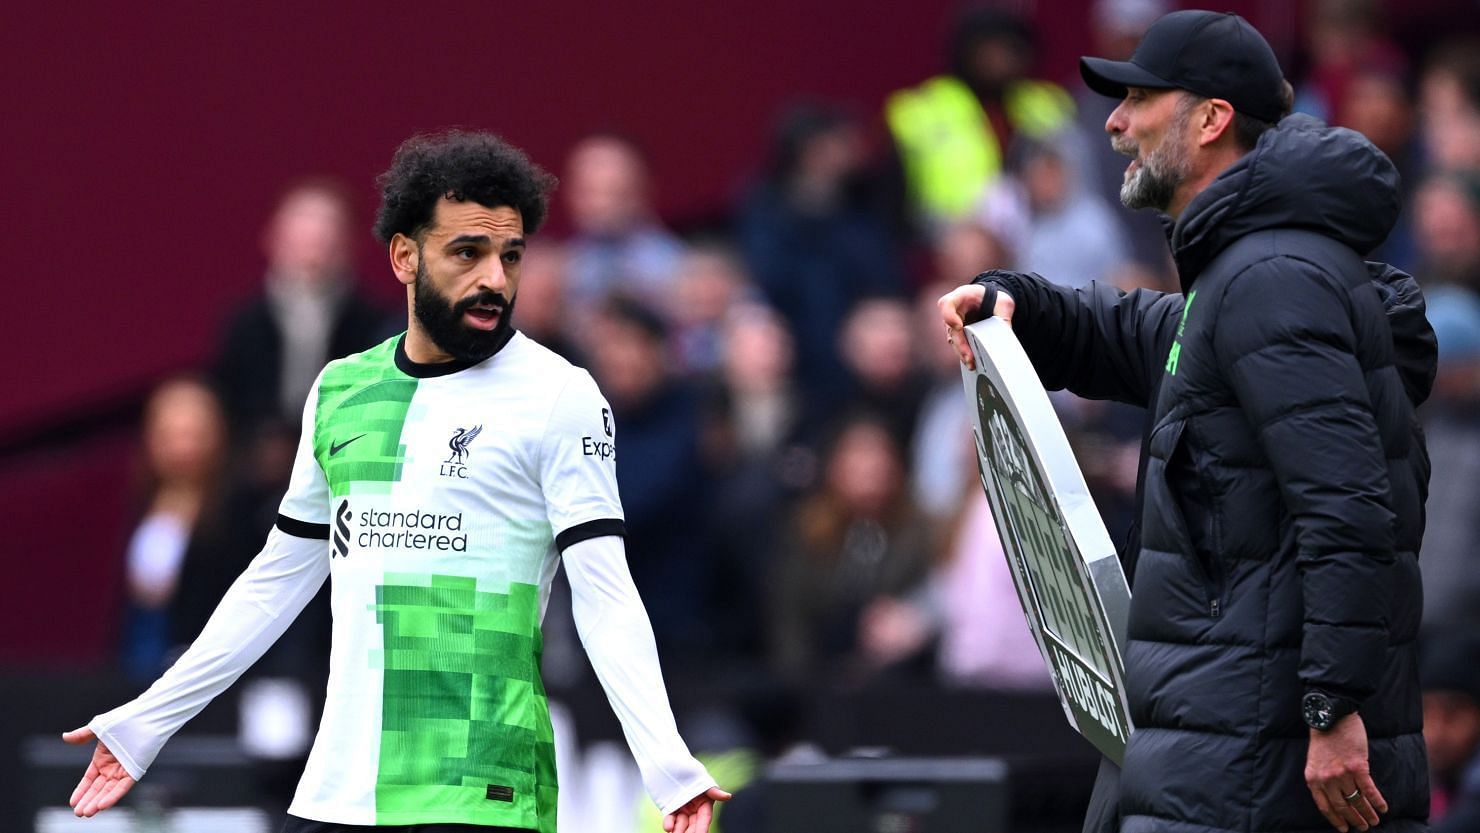 Mohamed Salah was benched for the game against West Ham